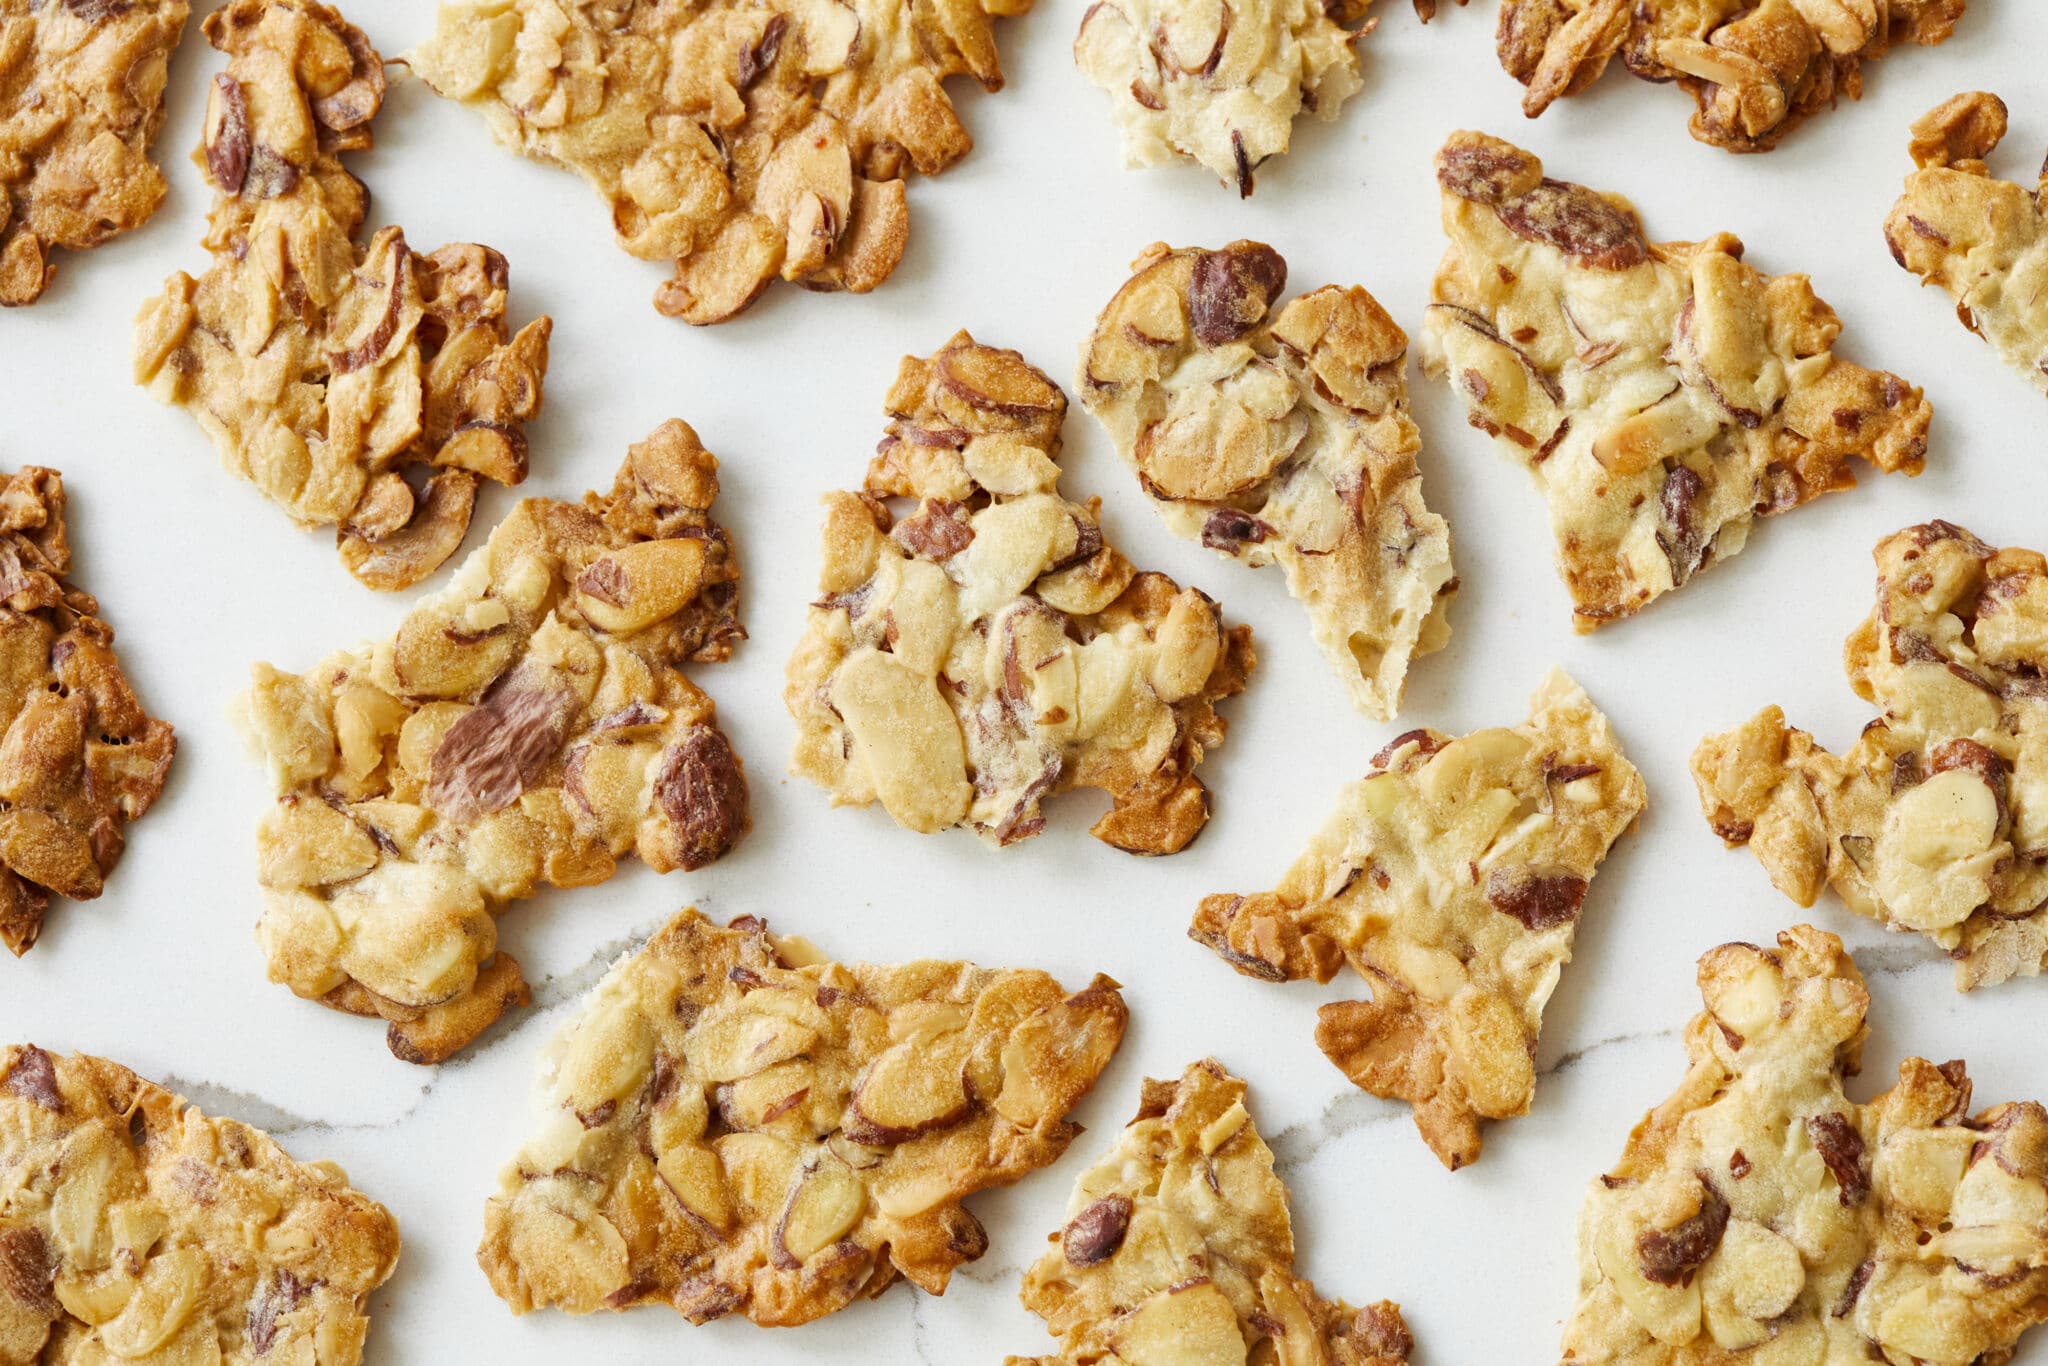 An overhead shot at satisfying Almond Crisps shows clusters of thin slivered almonds that are baked until crunchy and caramelized golden brown.